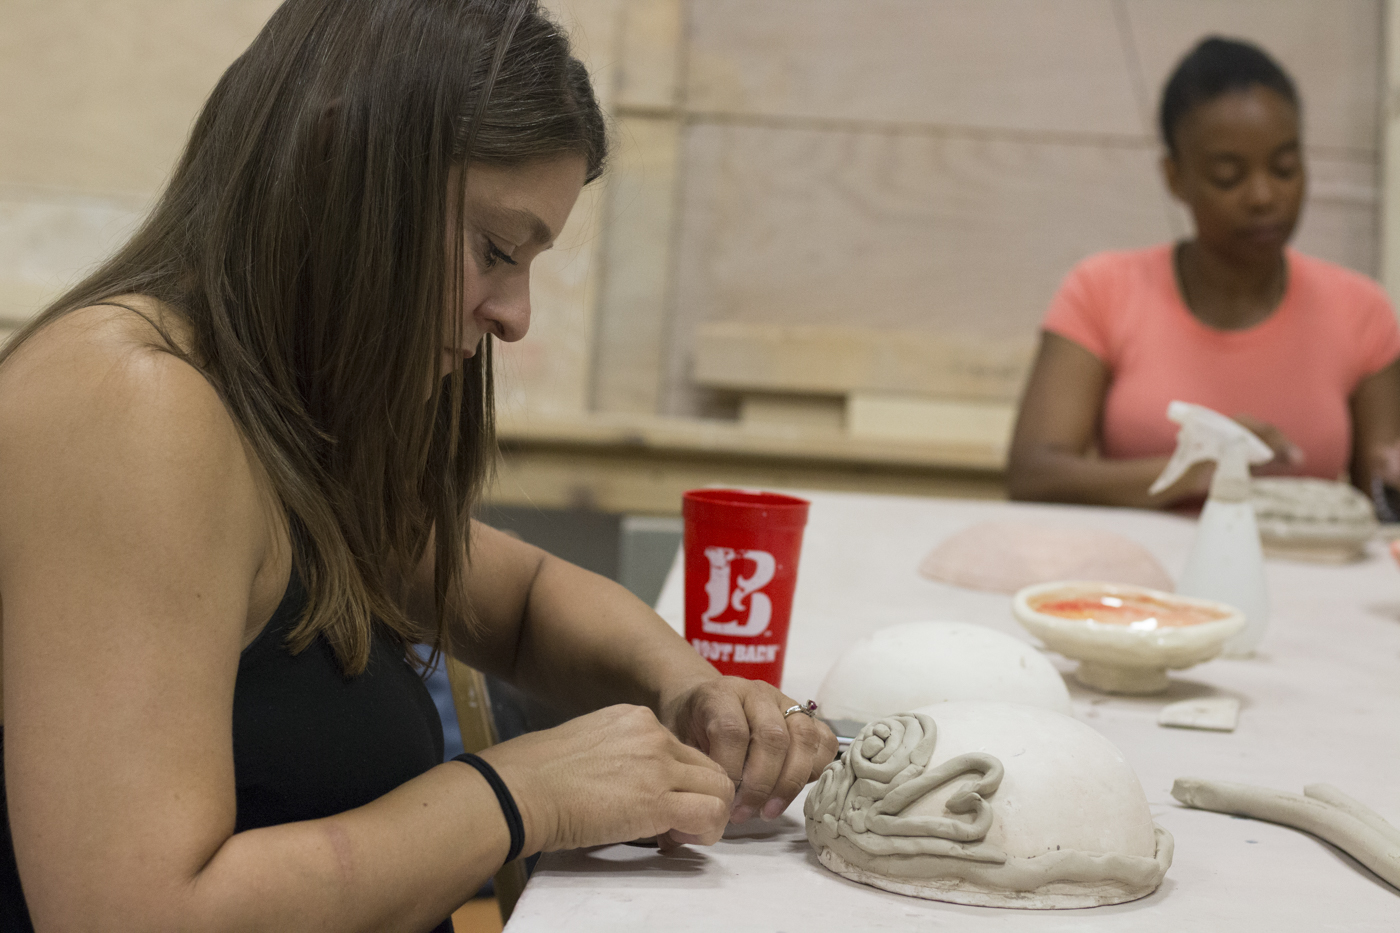 Wichita State alumni, Kristin Dexter, makes a bowl during the Empty Bowls event in Henrion Hall.